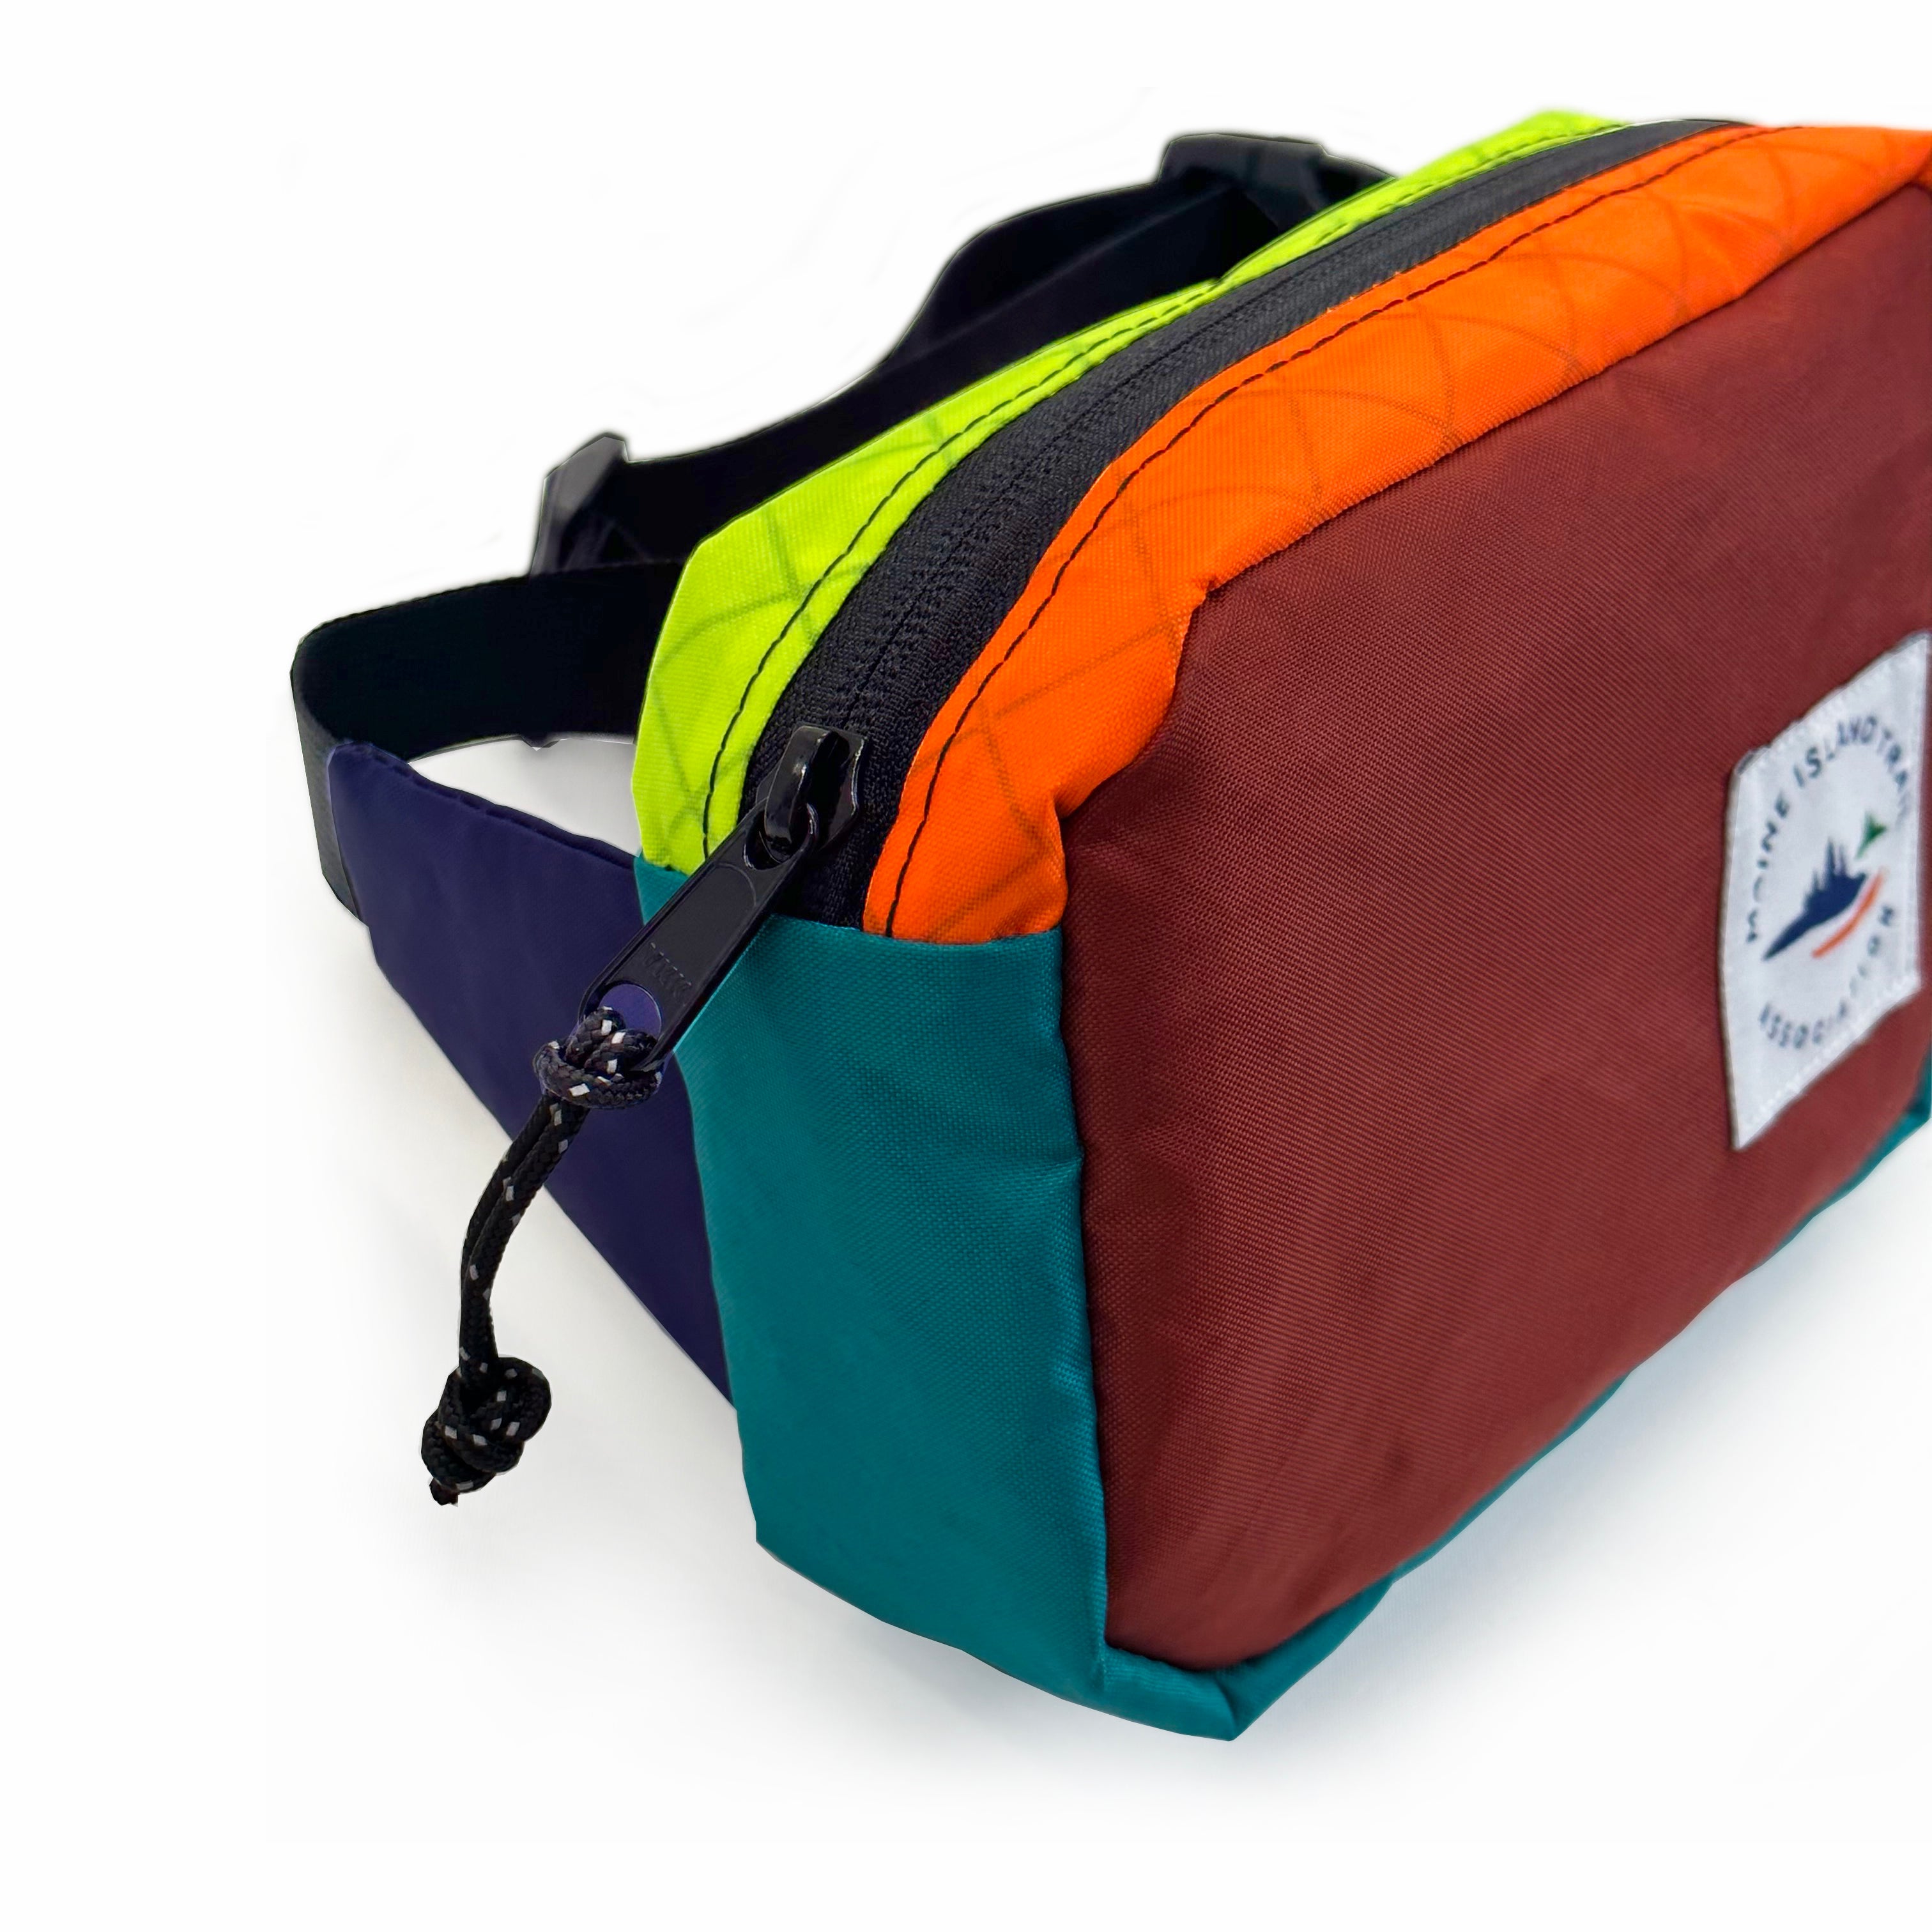 Durable and weather-resistant MITA x Flowfold Explorer Fanny Pack - Recycled Brick Red Color Block